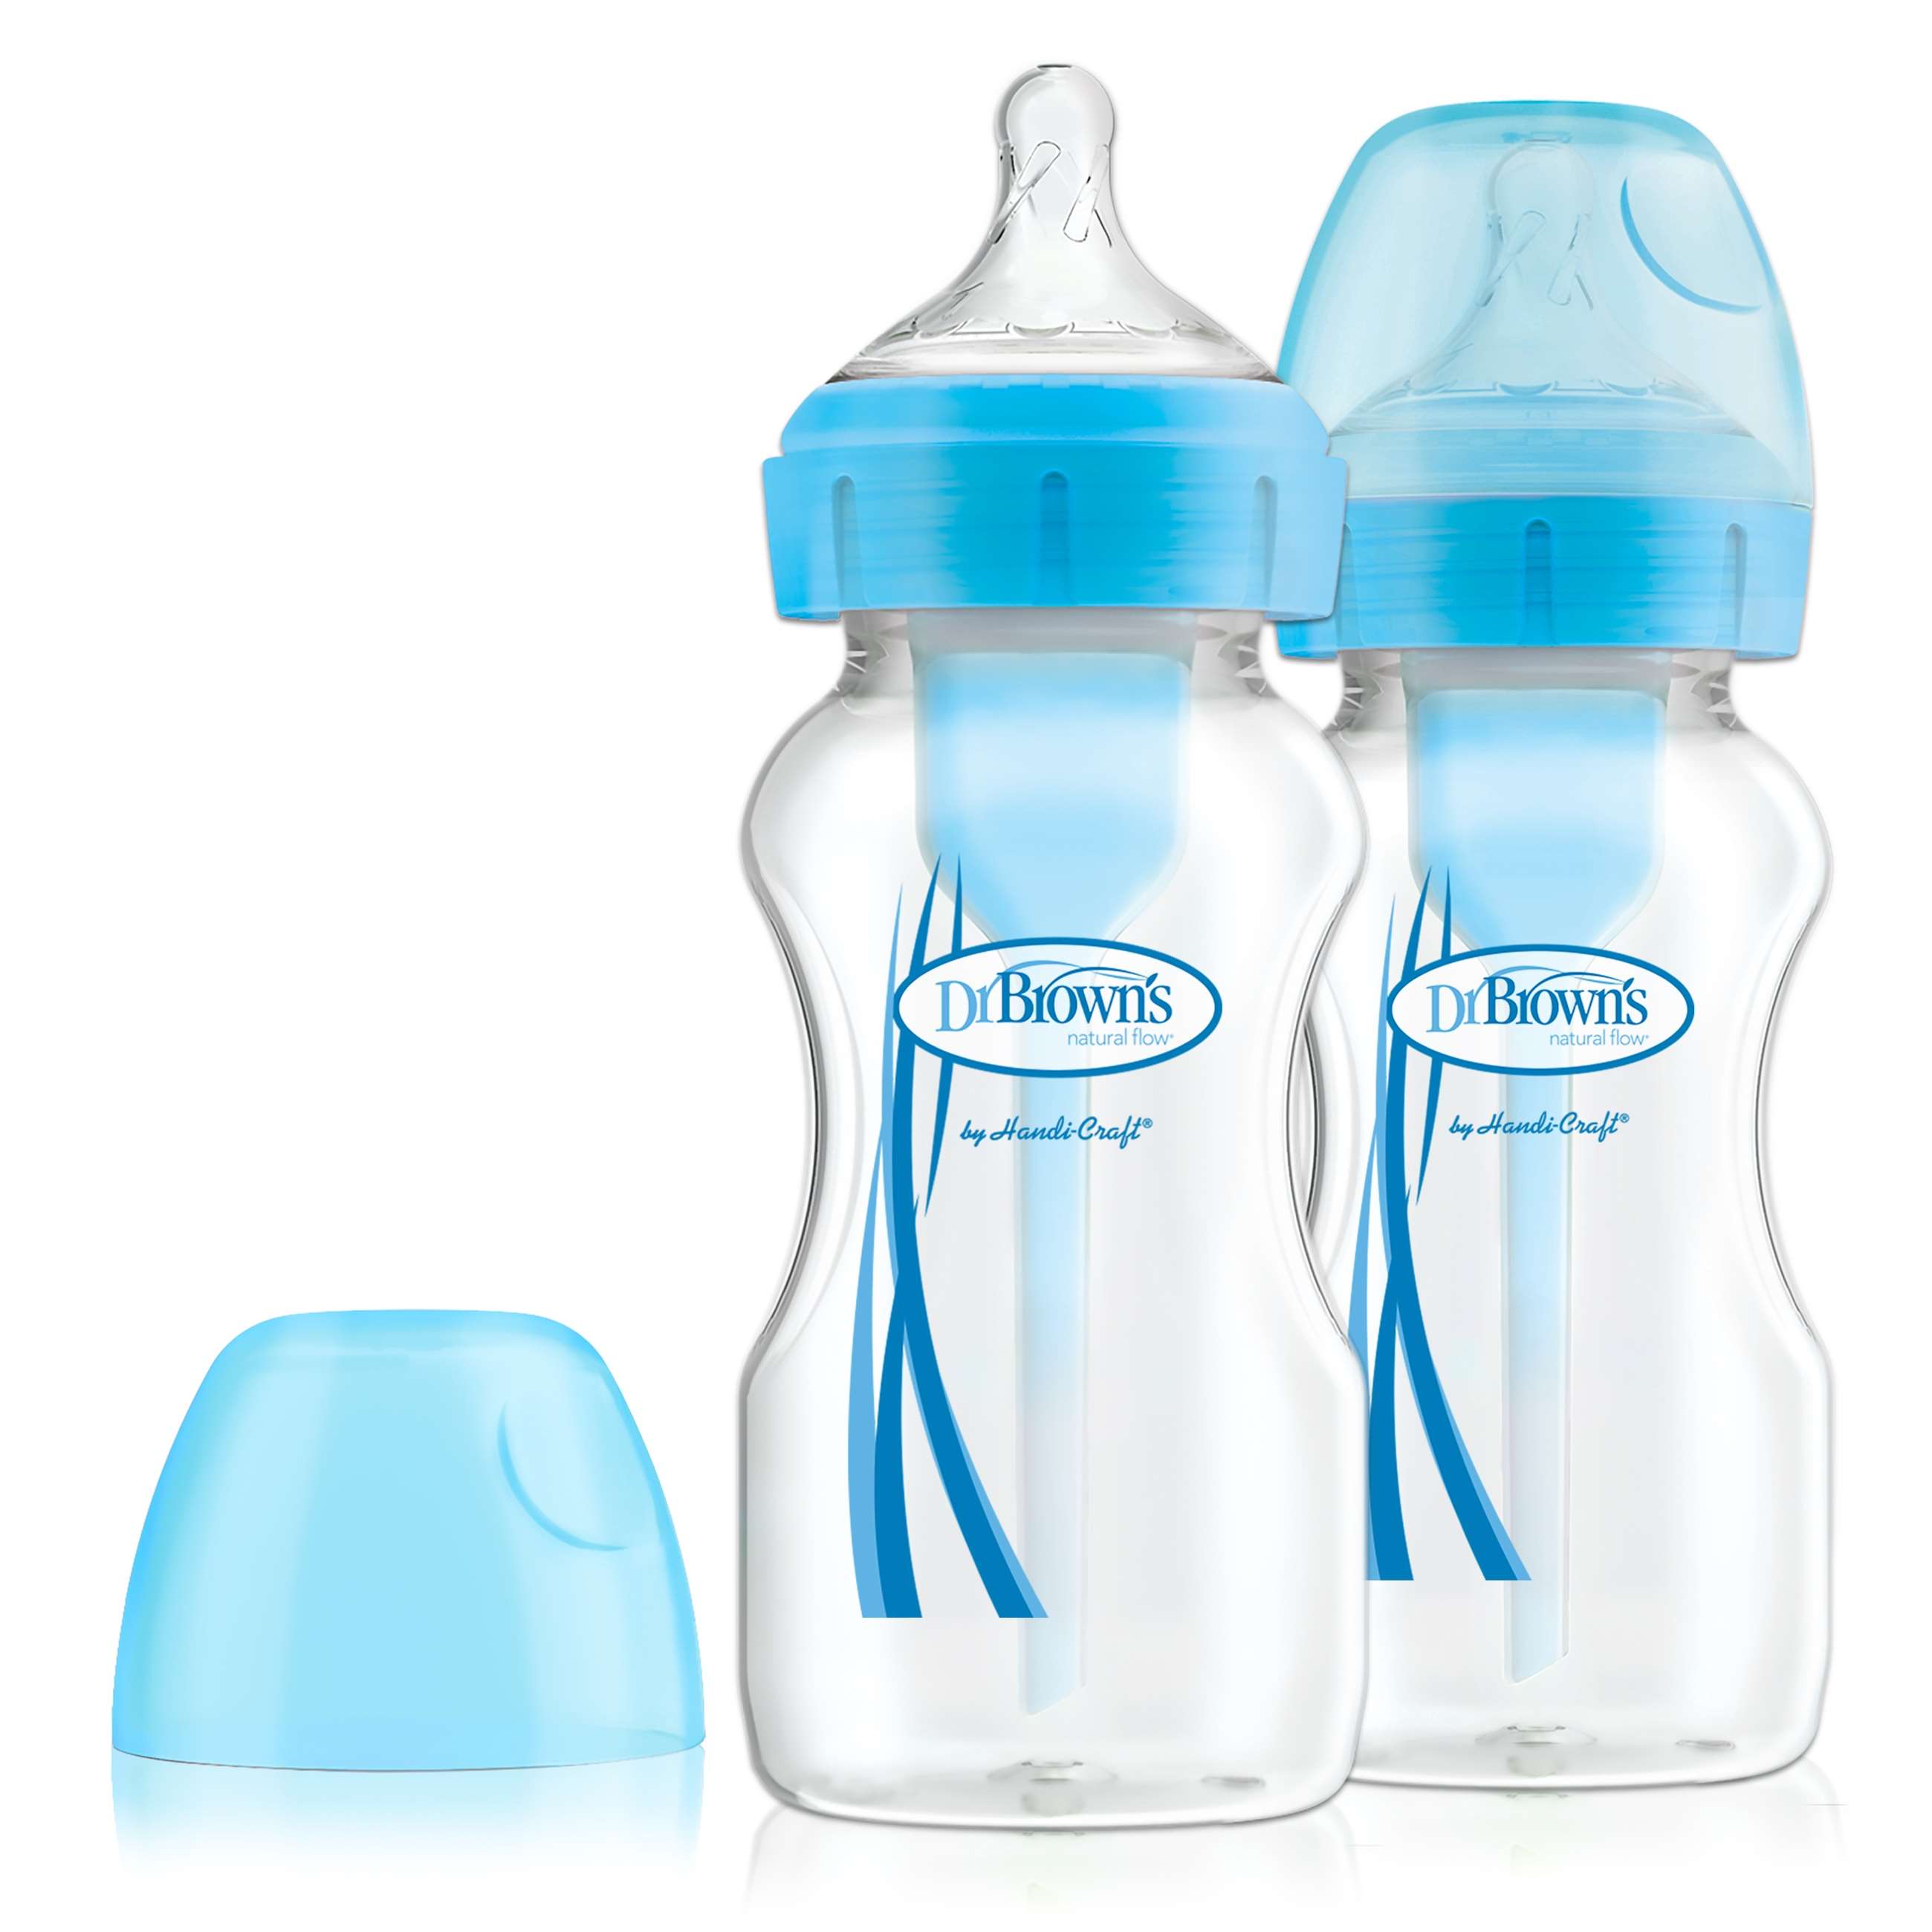 94008 product_options _wide-neck_9oz_270ml_2-pack_blue